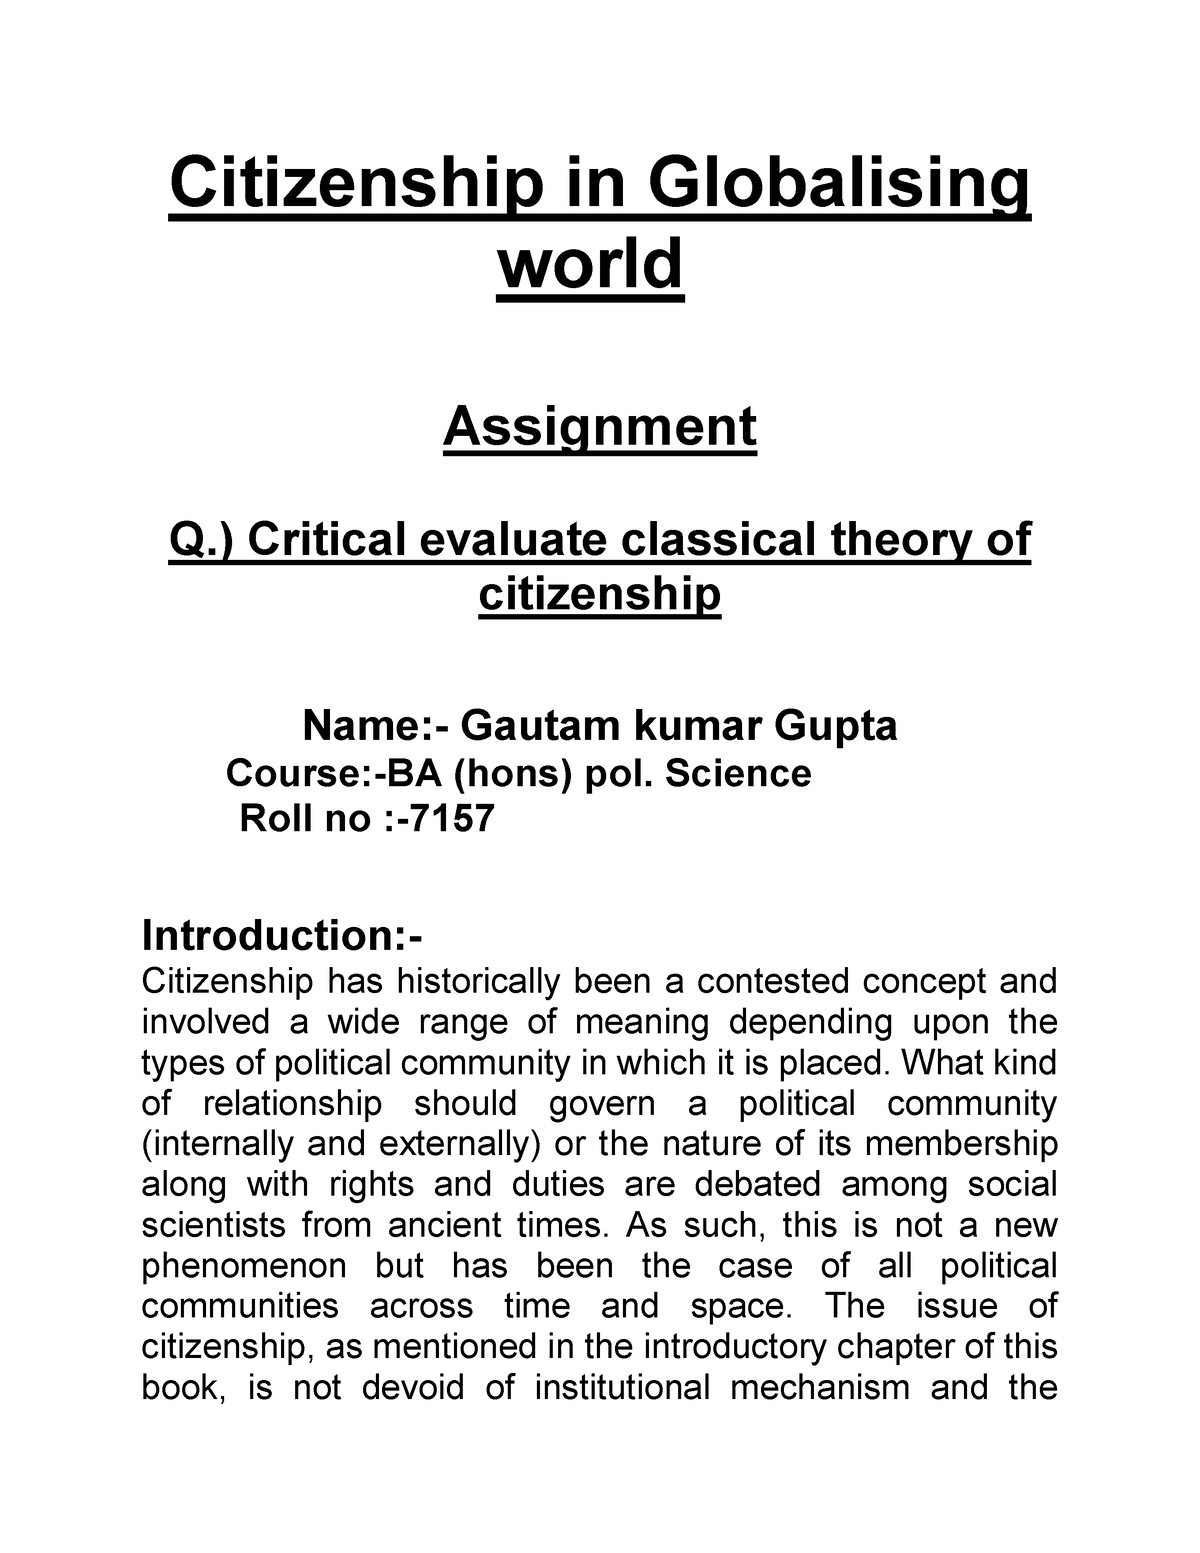 liberal citizenship theory essay